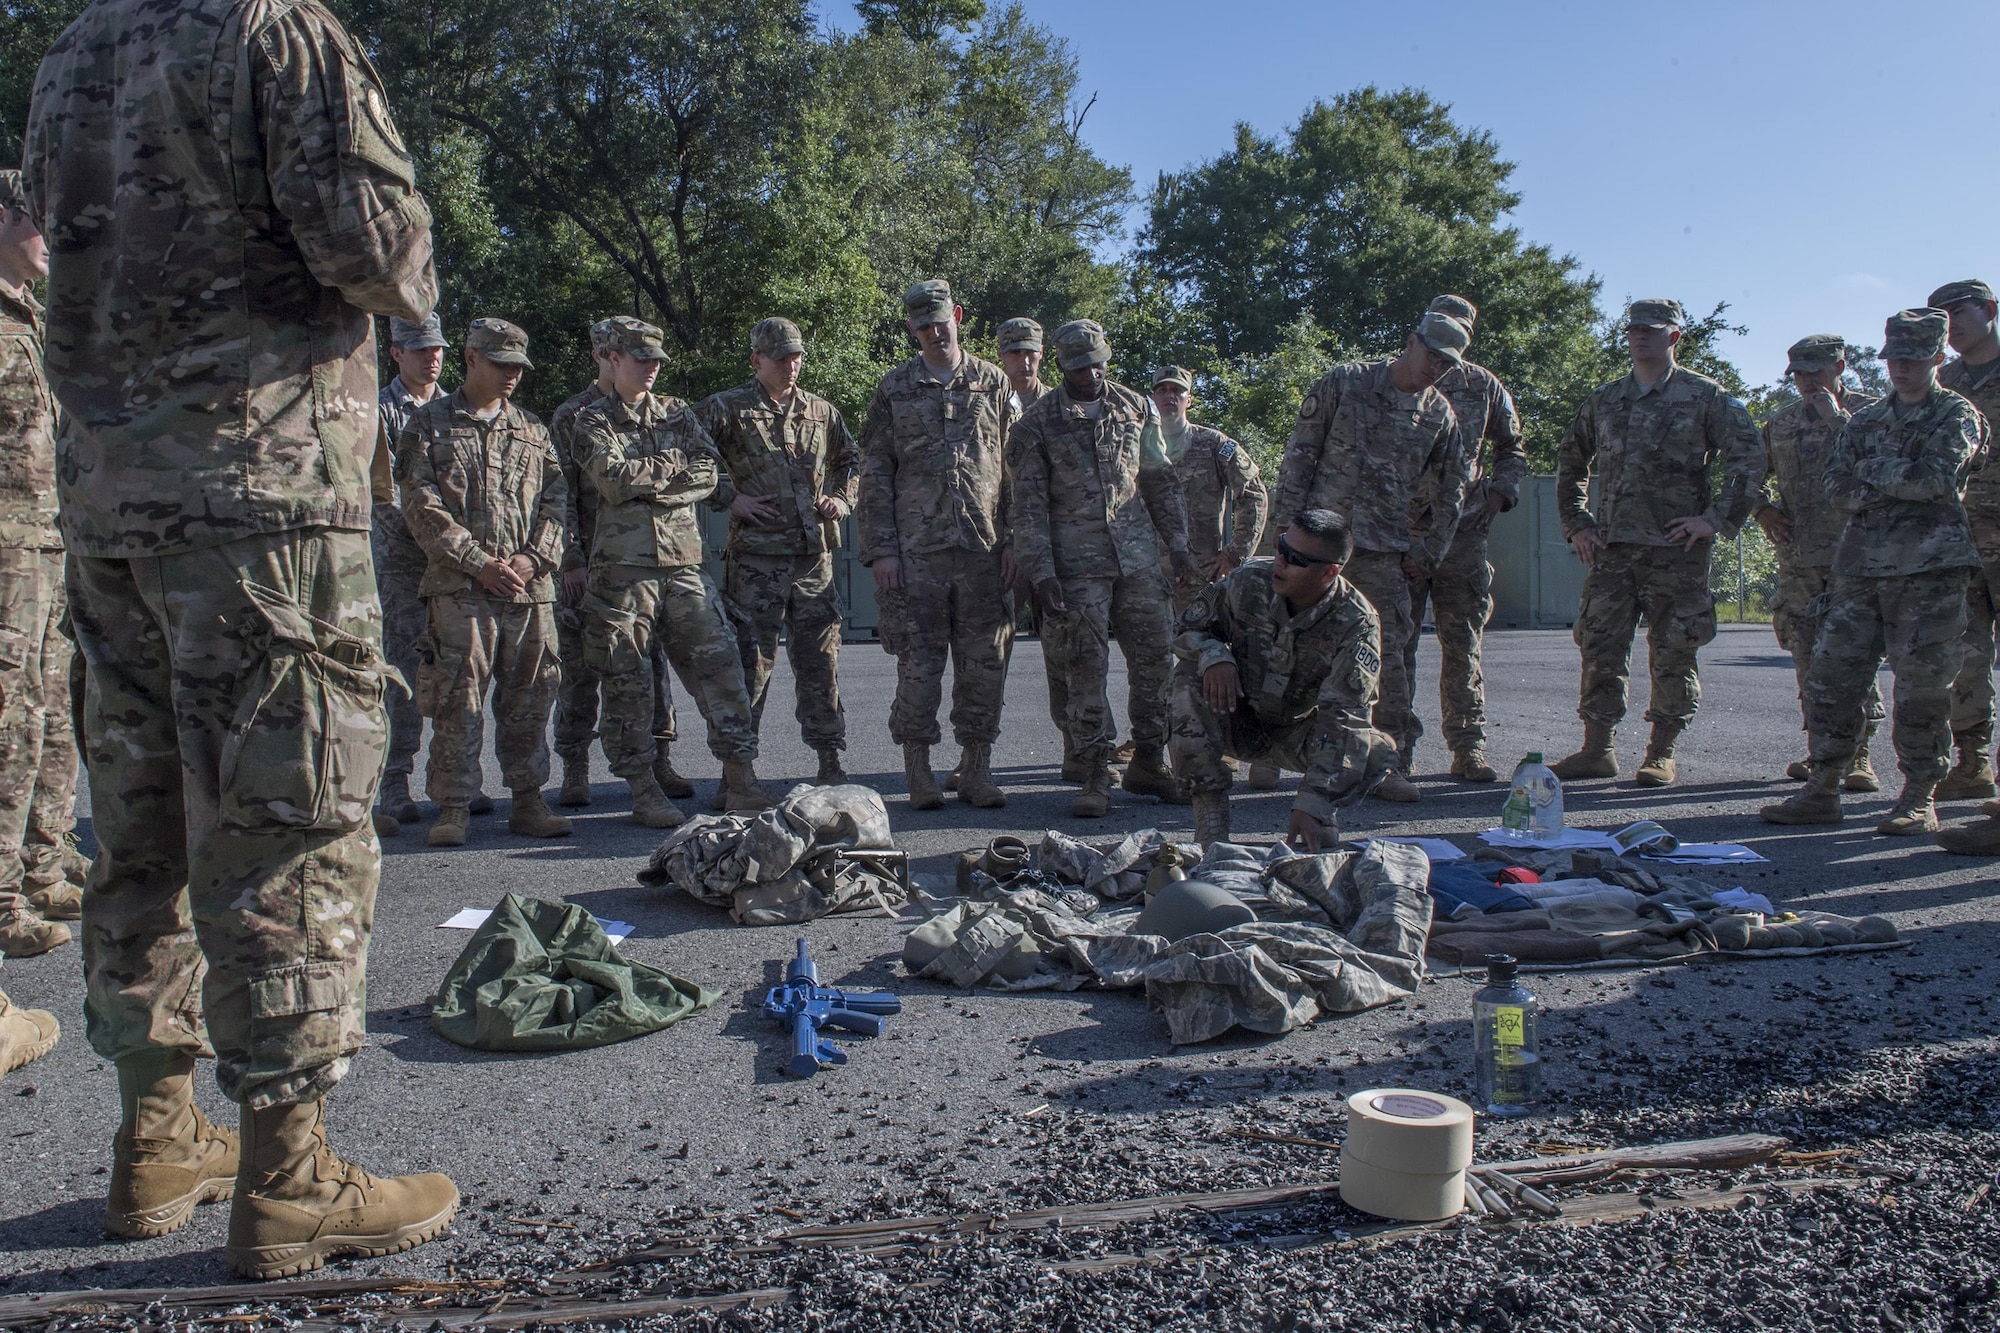 Tech. Sgt. Jose Deleon, 820th Combat Operations Squadron NCO in charge of deployed radio frequency systems and lead assessment instructor, demonstrates how to properly lay out mandatory items for an inspection during a Army Air Assault assessment, May 16, 2017, at Moody Air Force Base, Ga. Twenty-six Airmen attended the assessment which measured candidates’ aptitude in Air Assault operations, completion of equipment layouts, and rappelling. (U.S. Air Force photo by Tech. Sgt. Zachary Wolf)